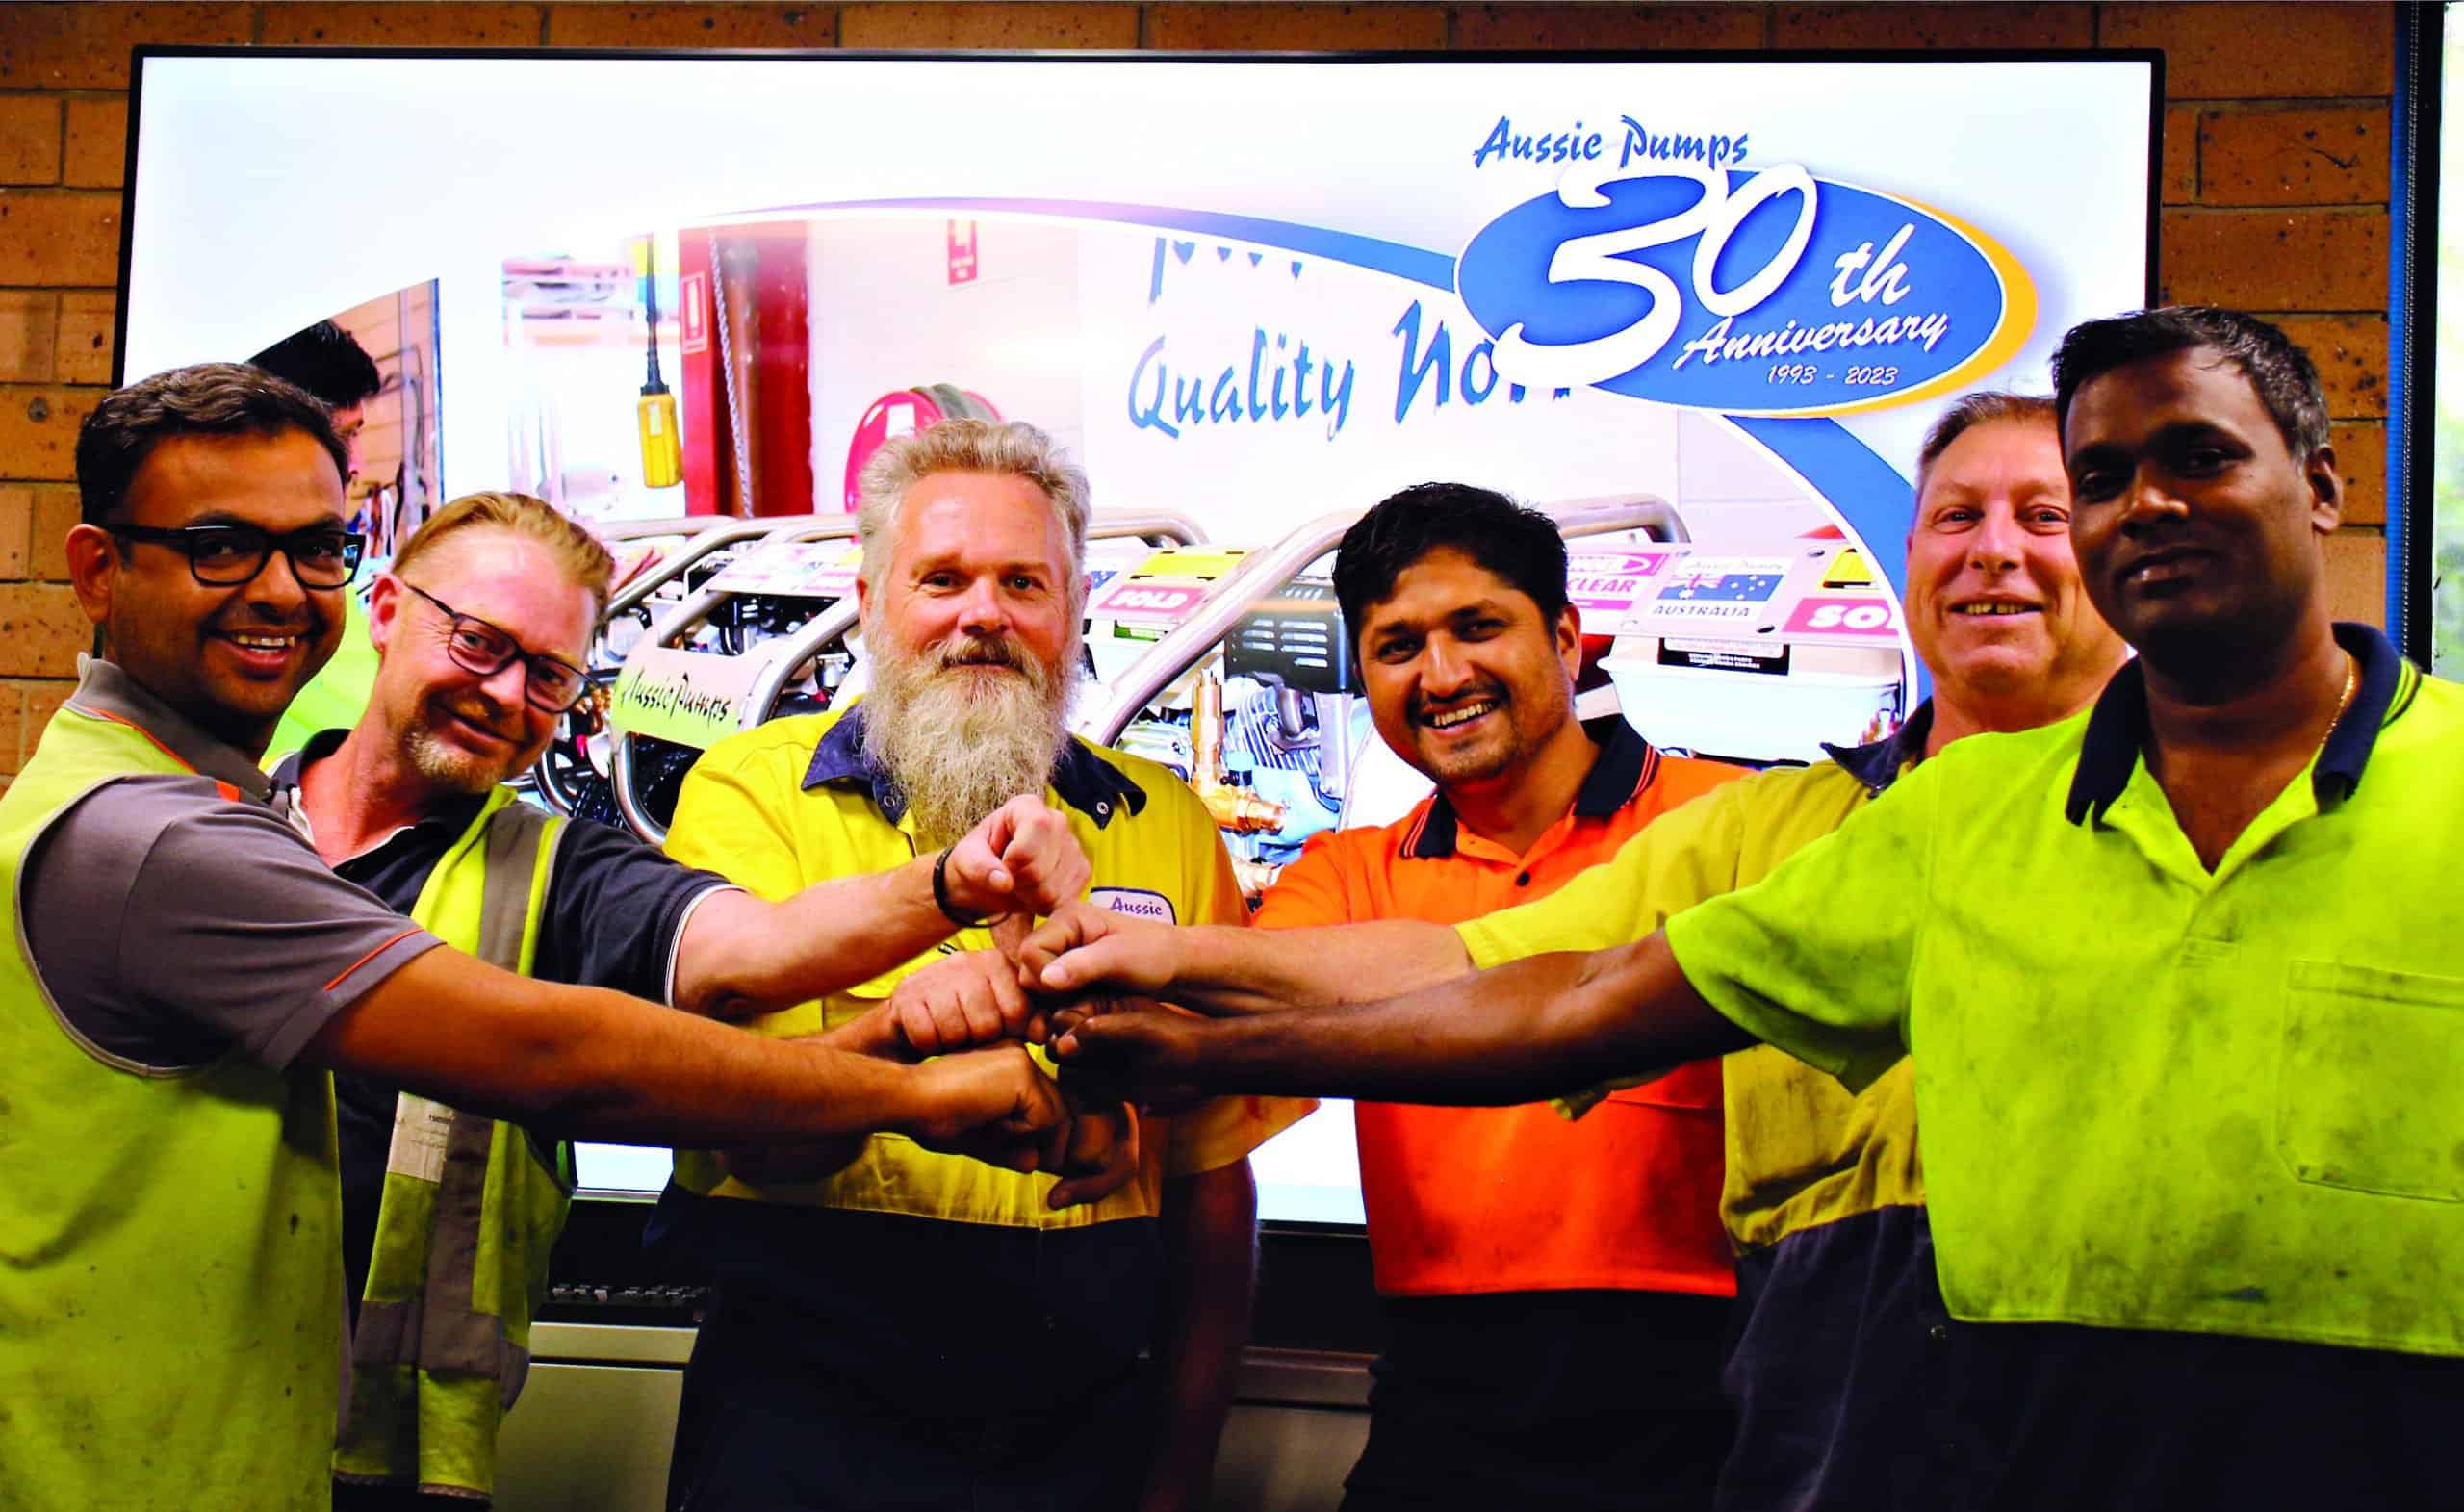 Aussie Pumps production team celebrated the company’s 30 year anniversary earlier this year.